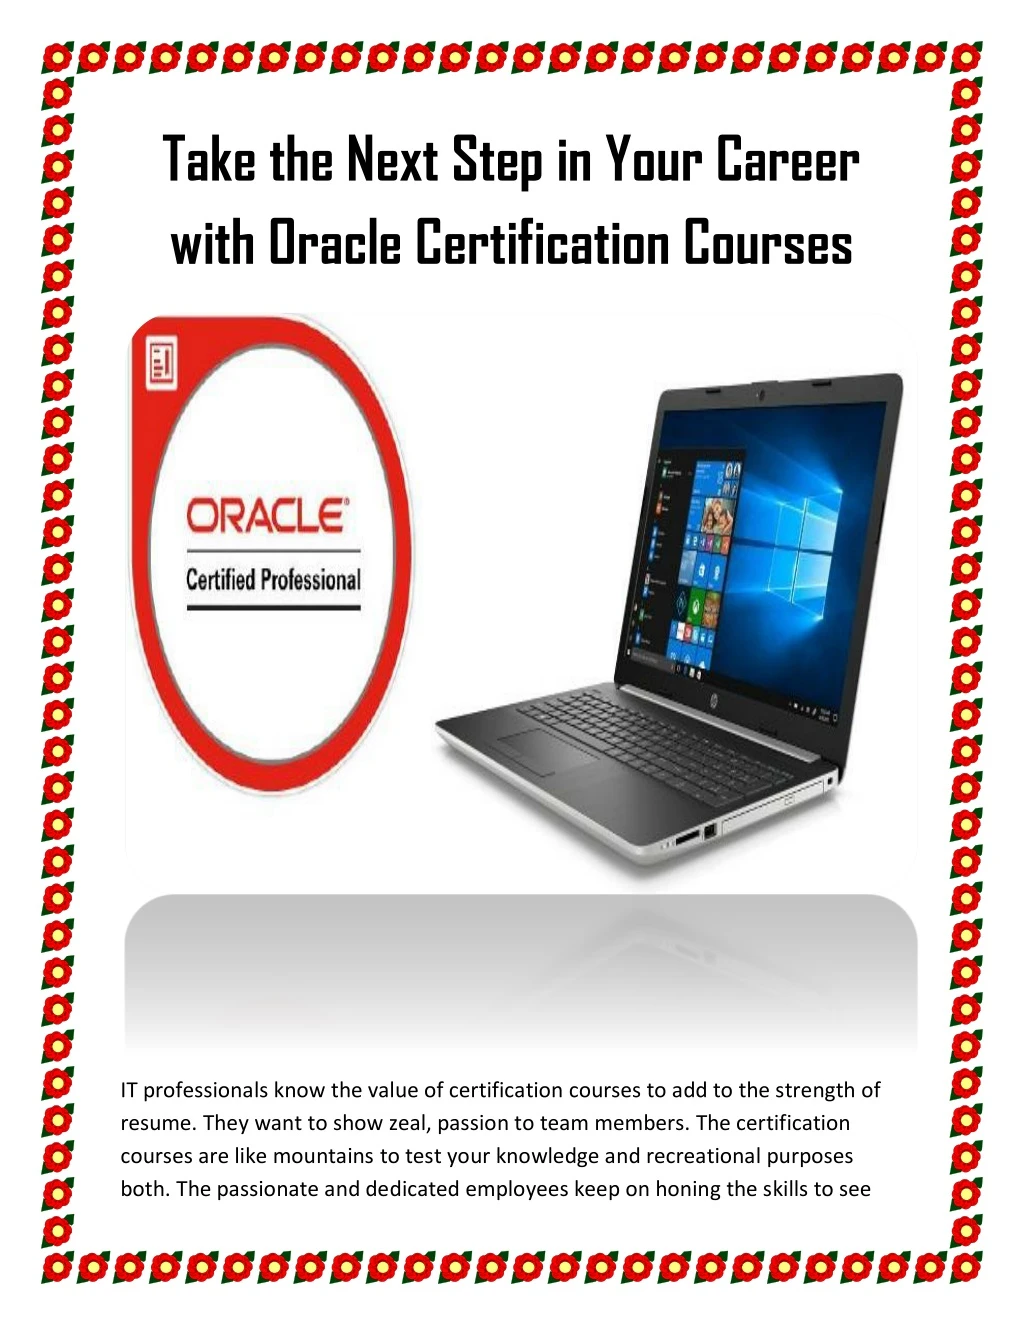 take the next step in your career with oracle